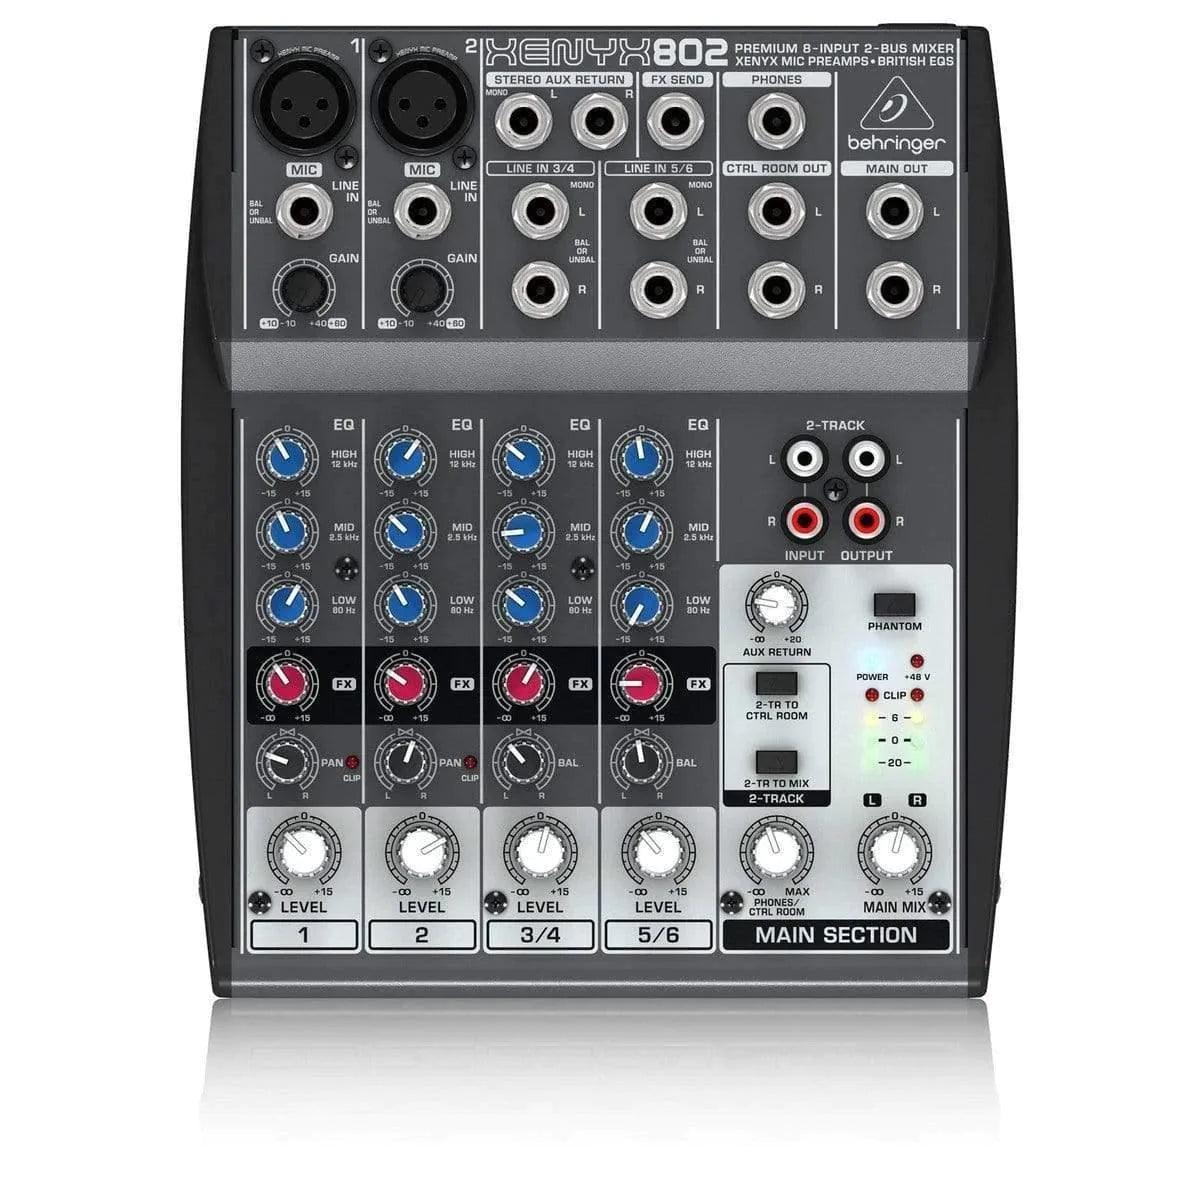 Behringer Xenyx 802 Analog Mixer (Discontinued)